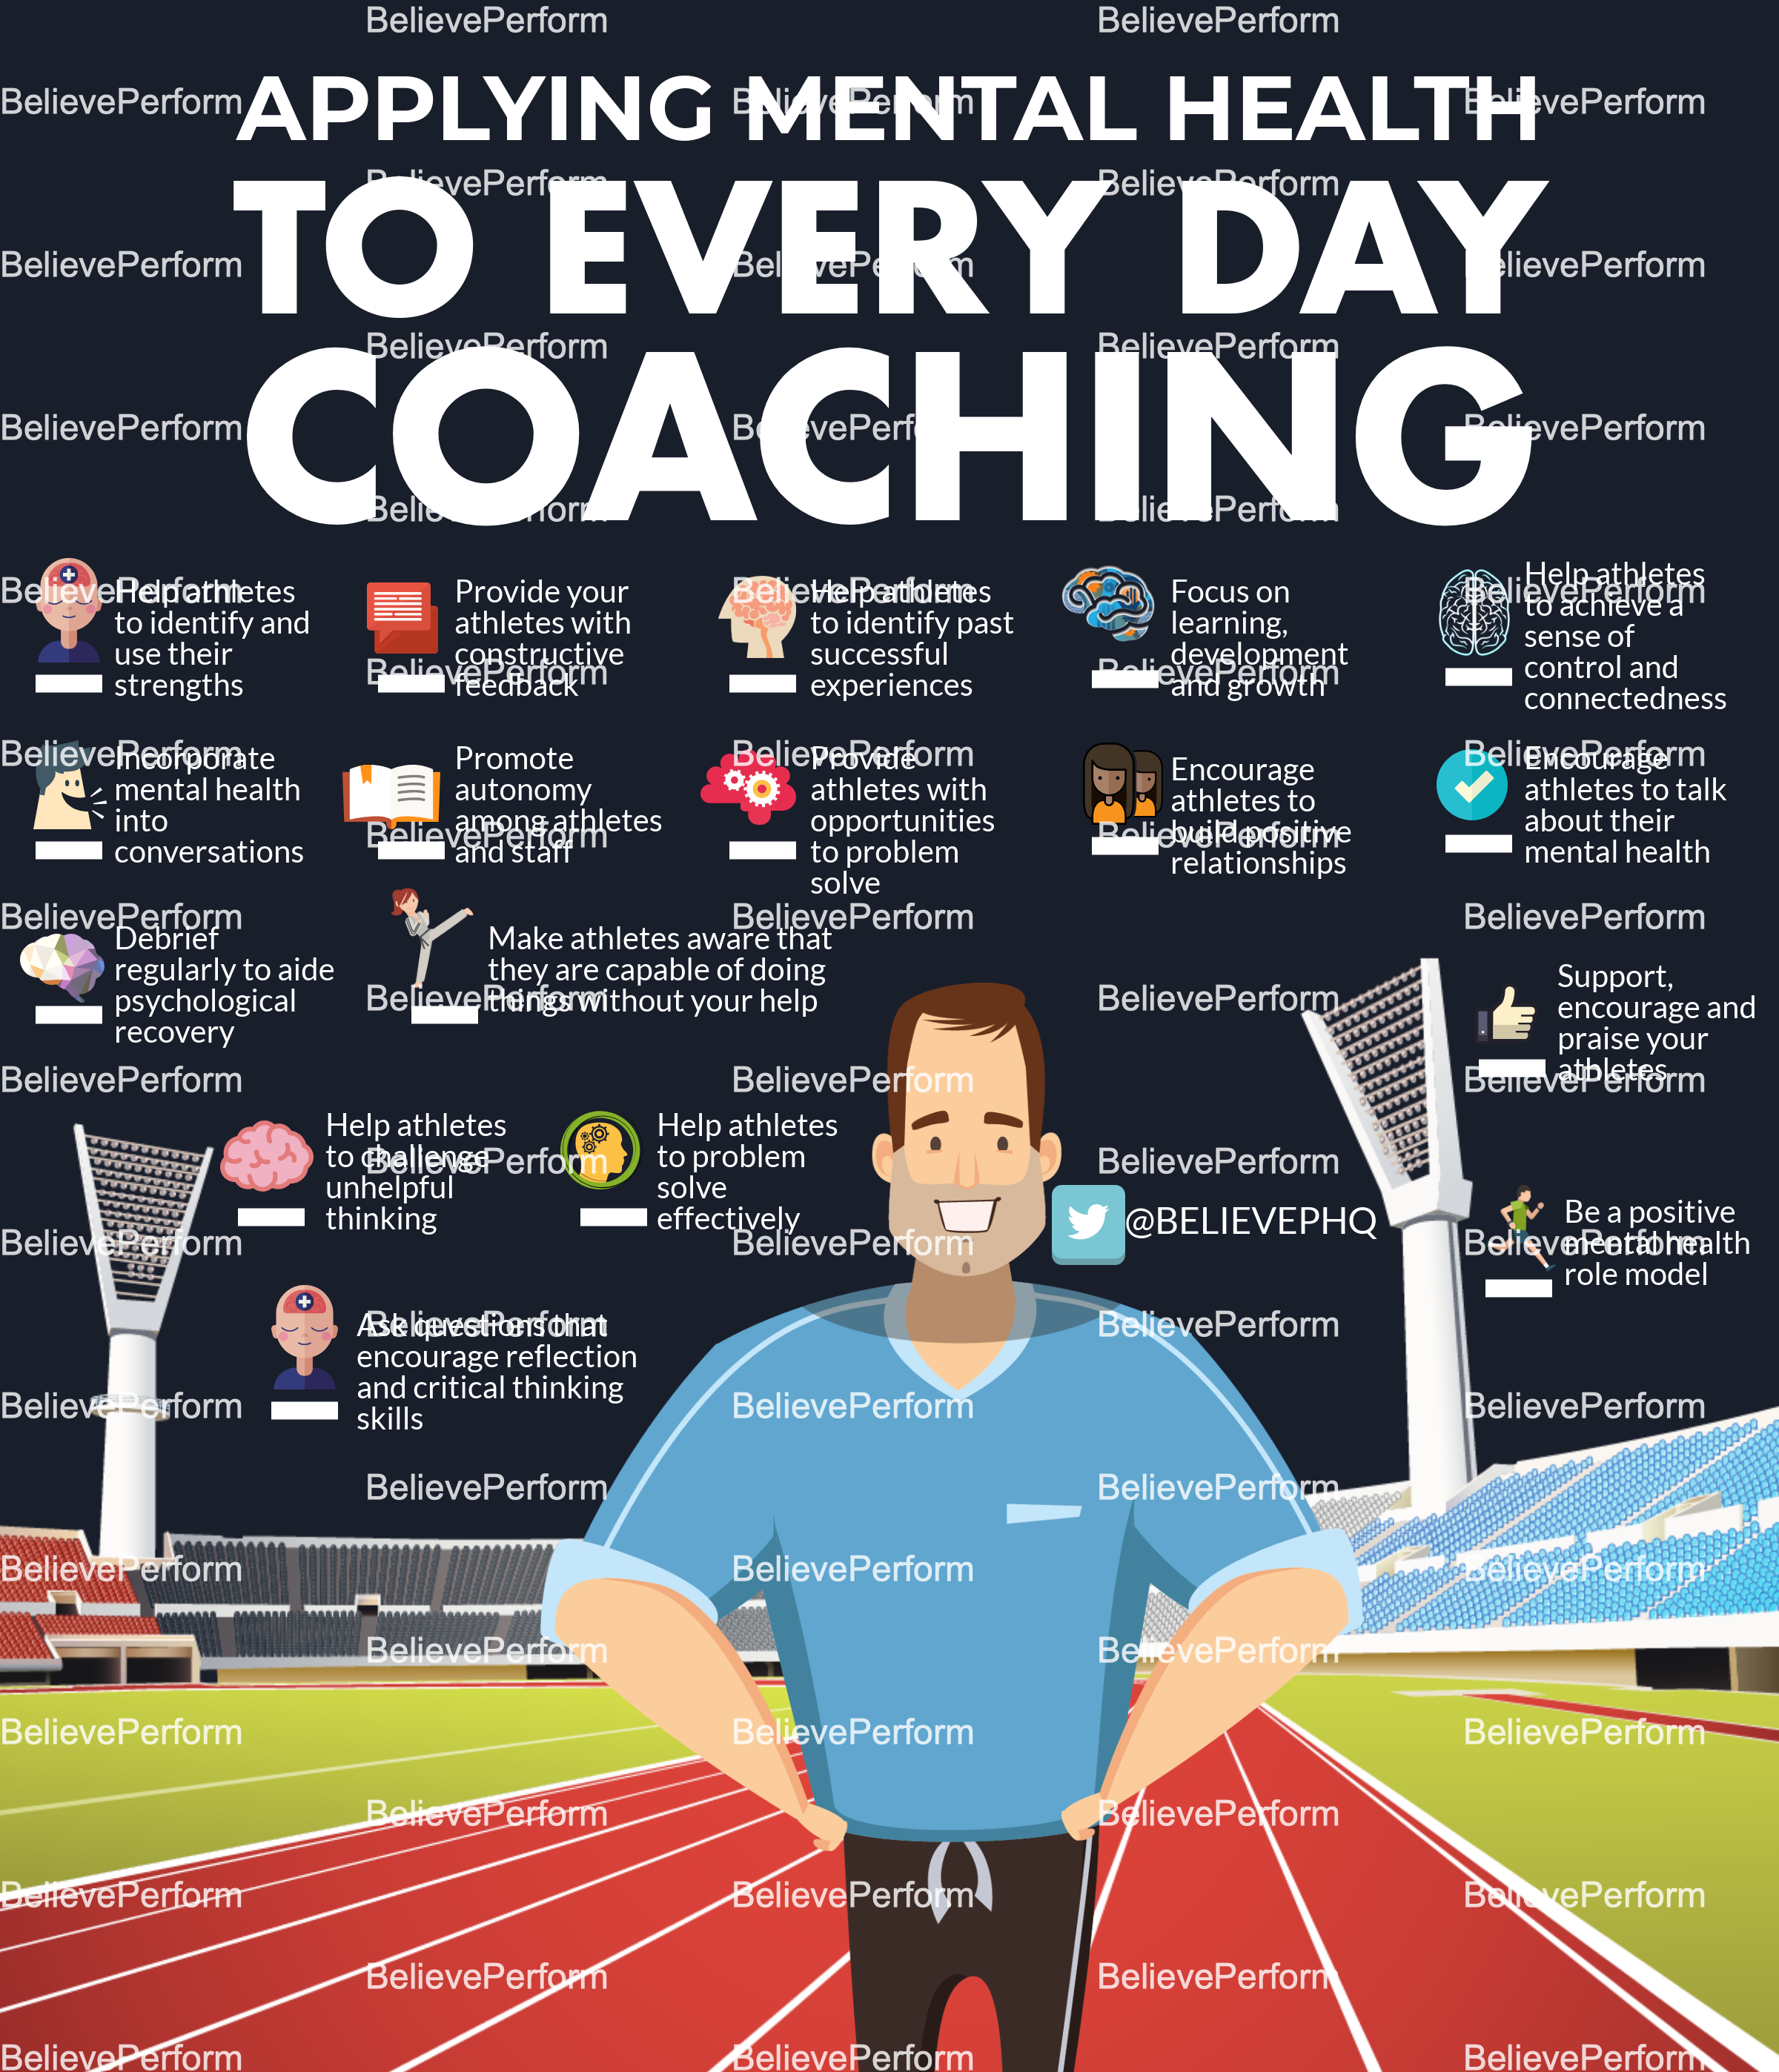 Applying mental health to everyday coaching - BelievePerform - The